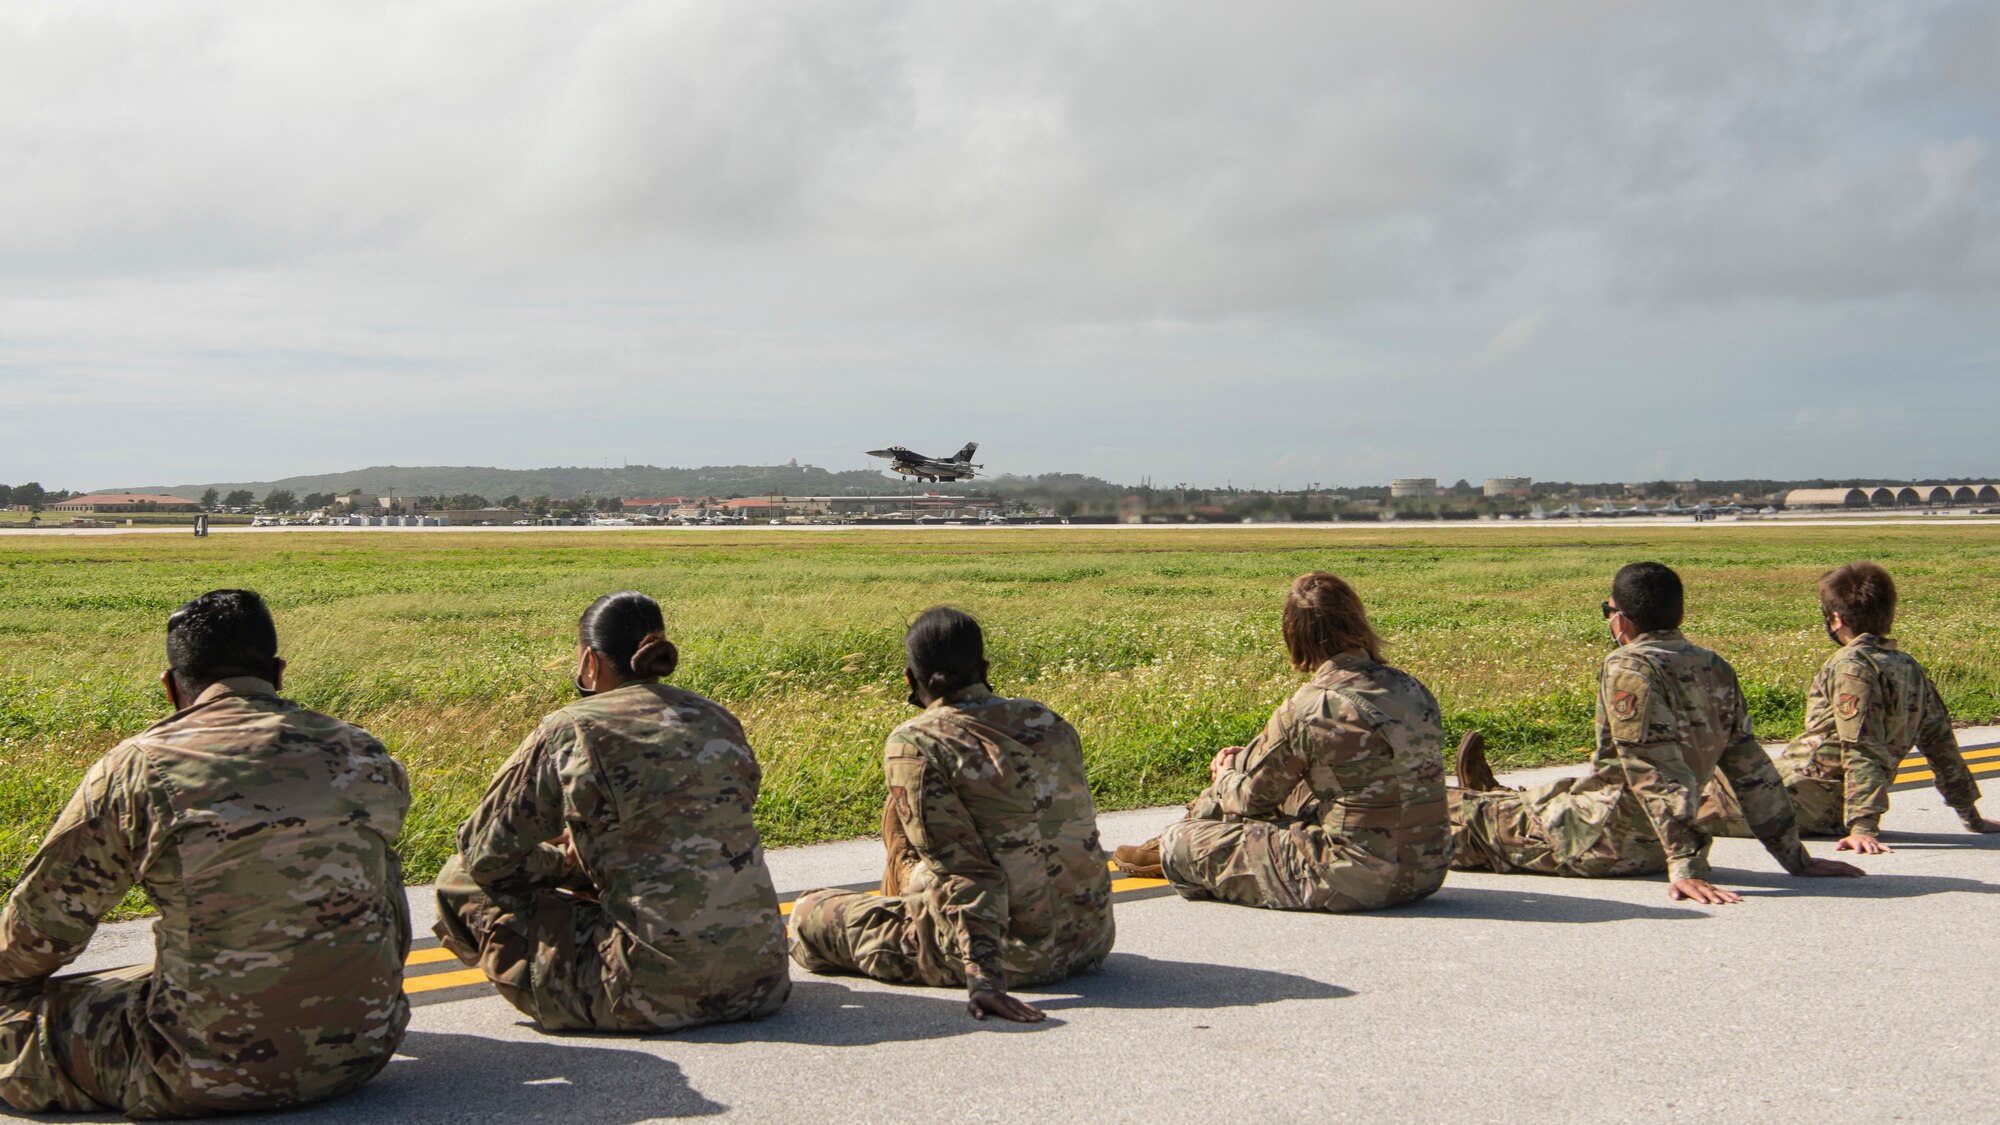 Airmen assigned to the 36th Maintenance Group watch as a U.S. Air Force F-16 Fighting Falcon, assigned to the 18th Aggressor Squadron, Eielson Air Force Base, Alaska, takes off during a group flight line engagement for Exercise Cope North 2021 at Andersen AFB, Guam, Feb. 5, 2021. Exercise Cope North 2021 is an annual U.S. Pacific Air Forces joint/combined, trilateral field training exercise occurring Feb. 3-19, 2021. The exercise includes participants from the U.S. Air Force, U.S. Navy, U.S. Marine Corps, Japan Air Self-Defense Force and Royal Australian Air Force. (U.S. Air Force photo by Senior Airman Aubree Owens)